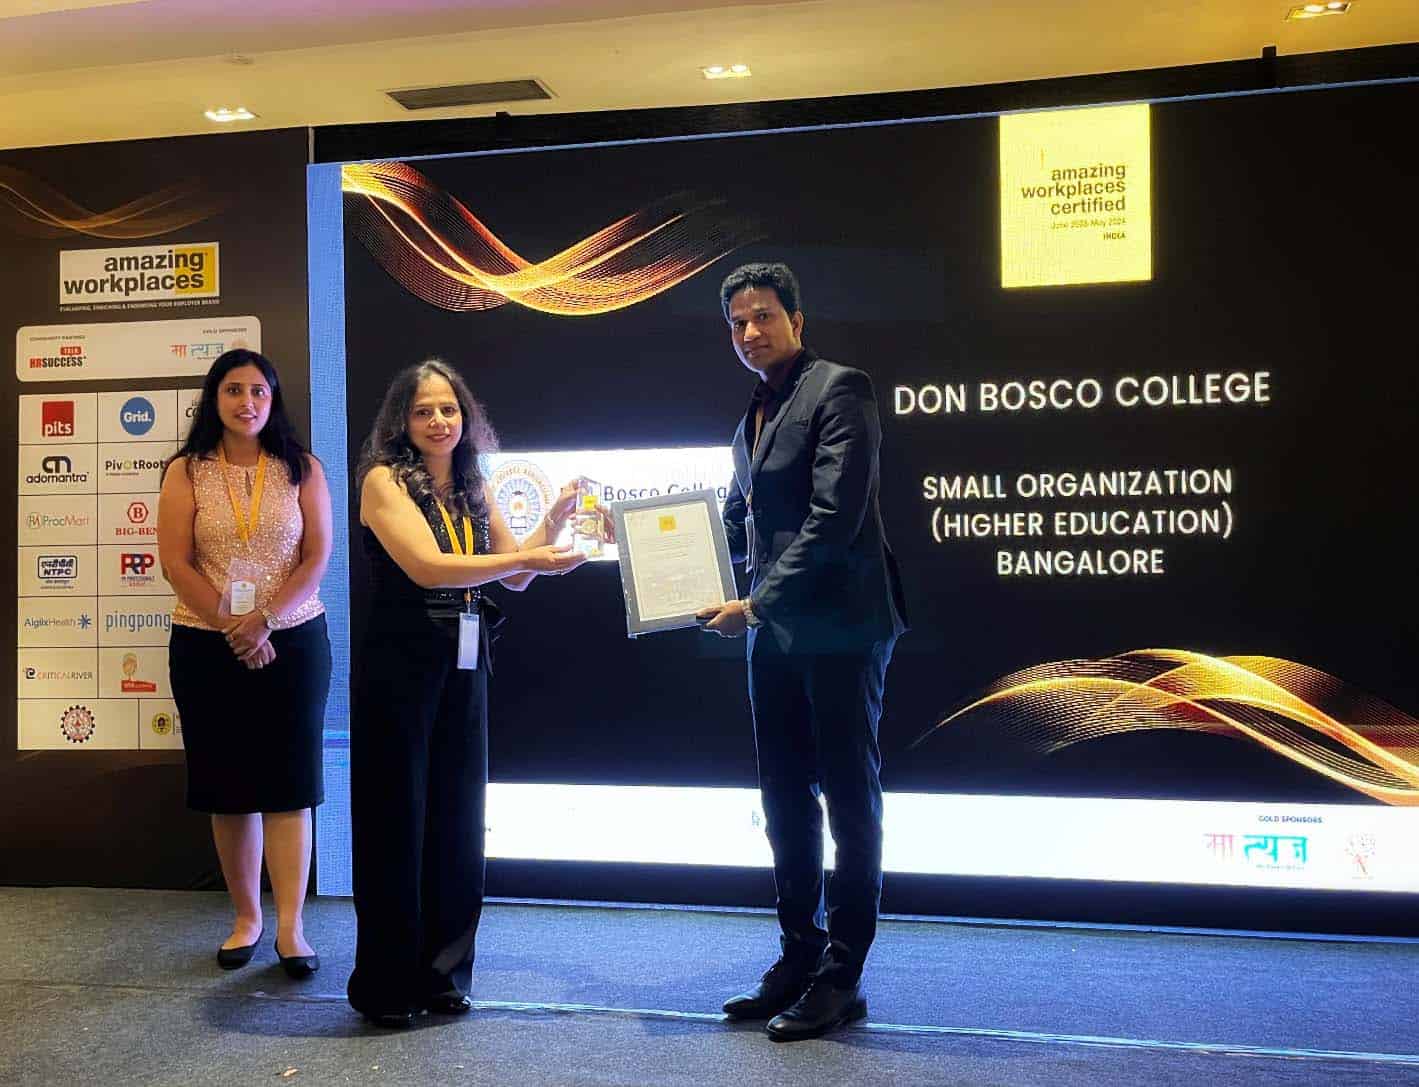 Achieving Excellence in Education: Don Bosco College Bangalore receives “Amazing Workplace Certified Organization” Award